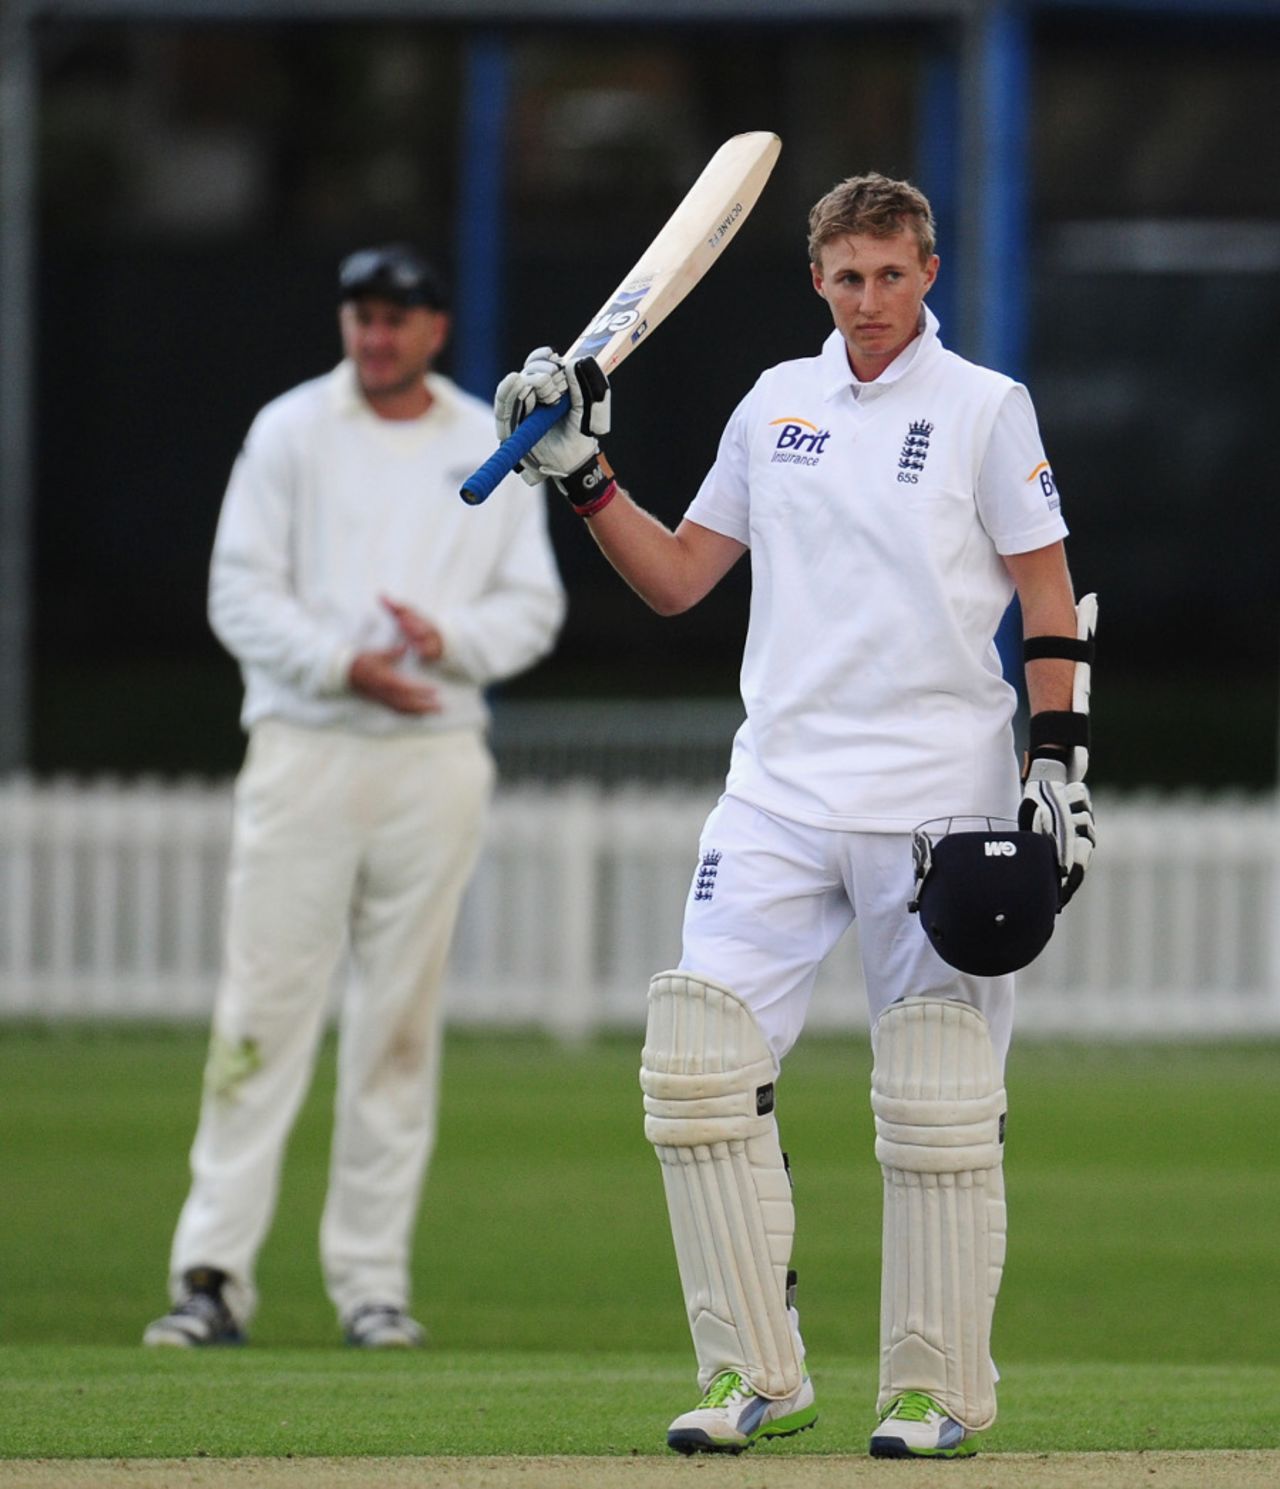 Joe Root reached his third hundred of the season late on the second day, England Lions v New Zealanders, Tour match, Grace Road, 2nd day, May 10, 2013